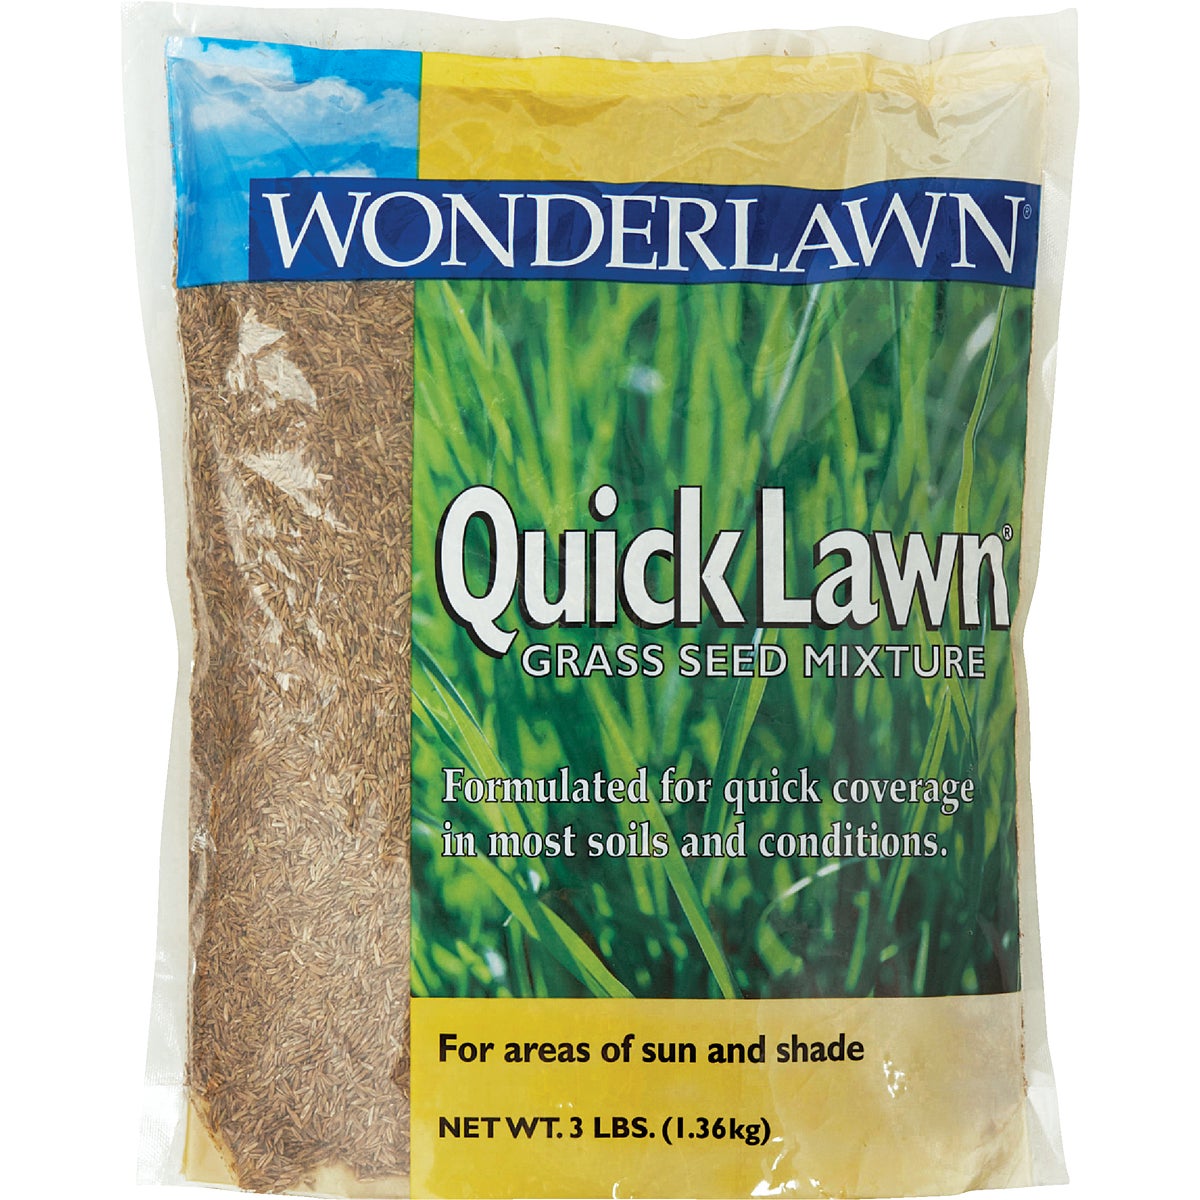 Item 763101, Grass seed that grows quickly and easily in most soil conditions in areas 